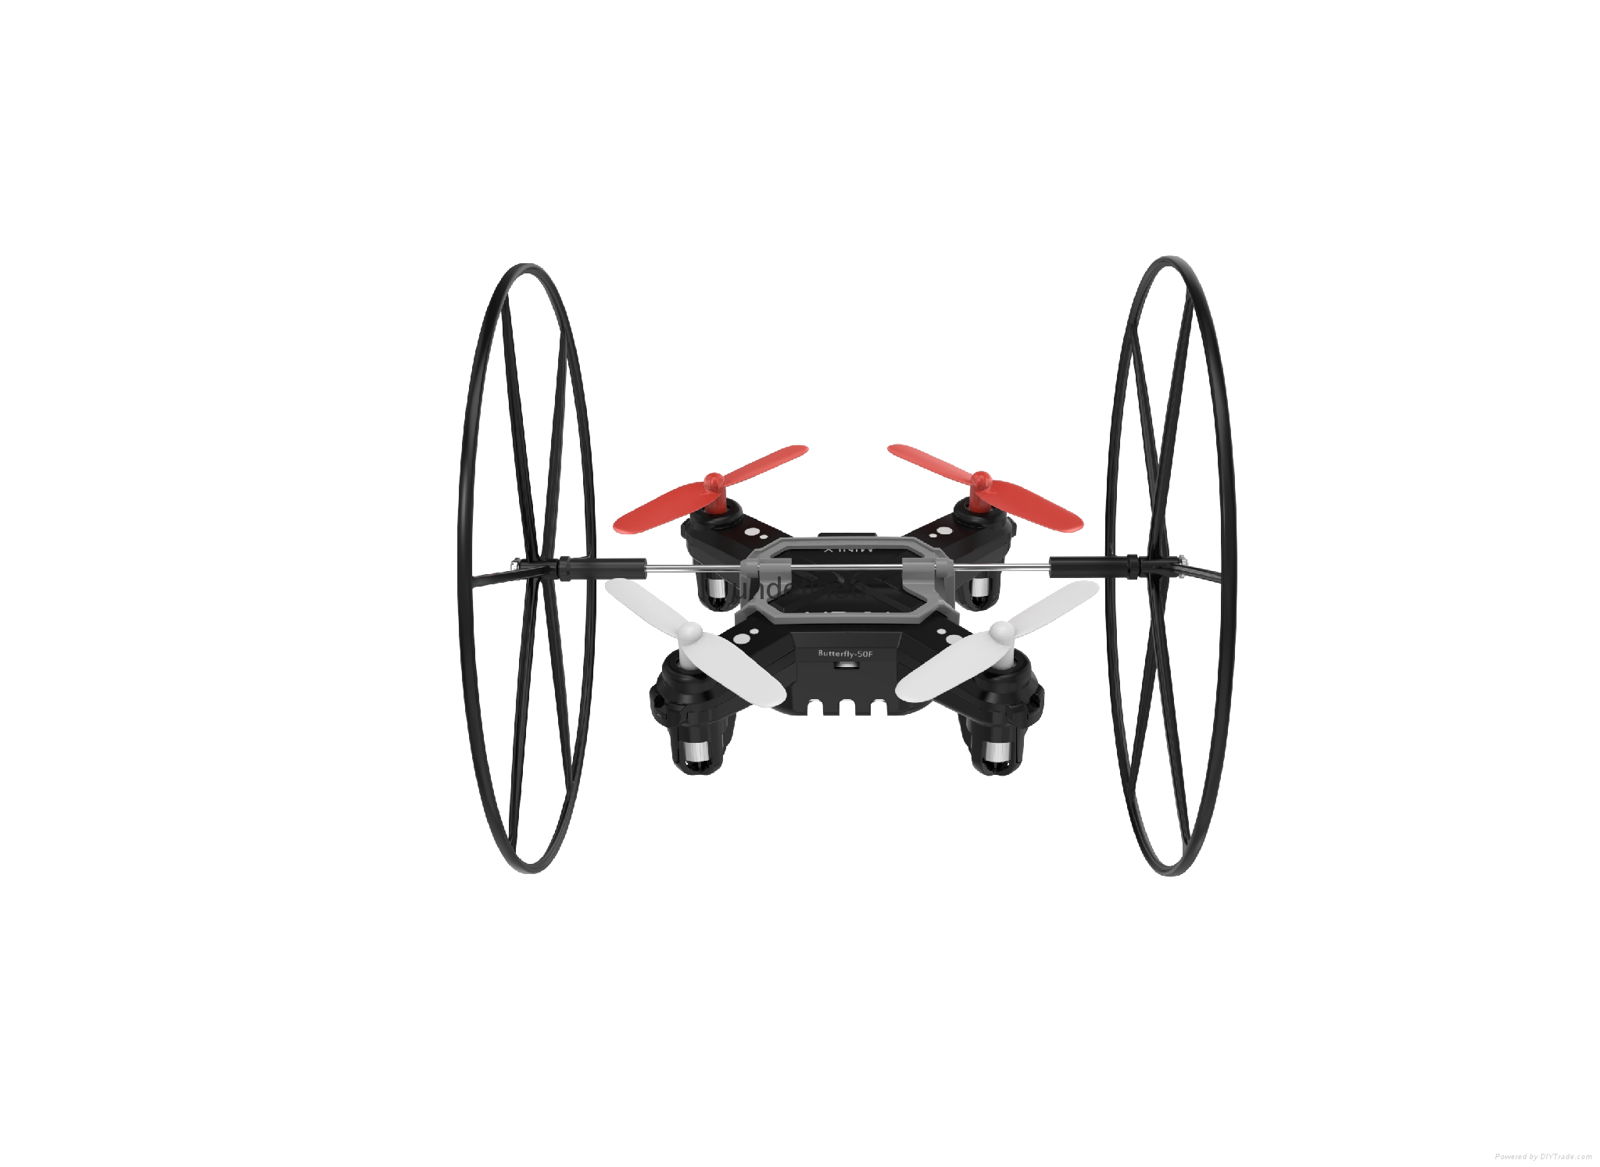 Apex Butterfly Quadcopter with Wheels 2.4G 6-Axis 4 Channels Uav Drone 3